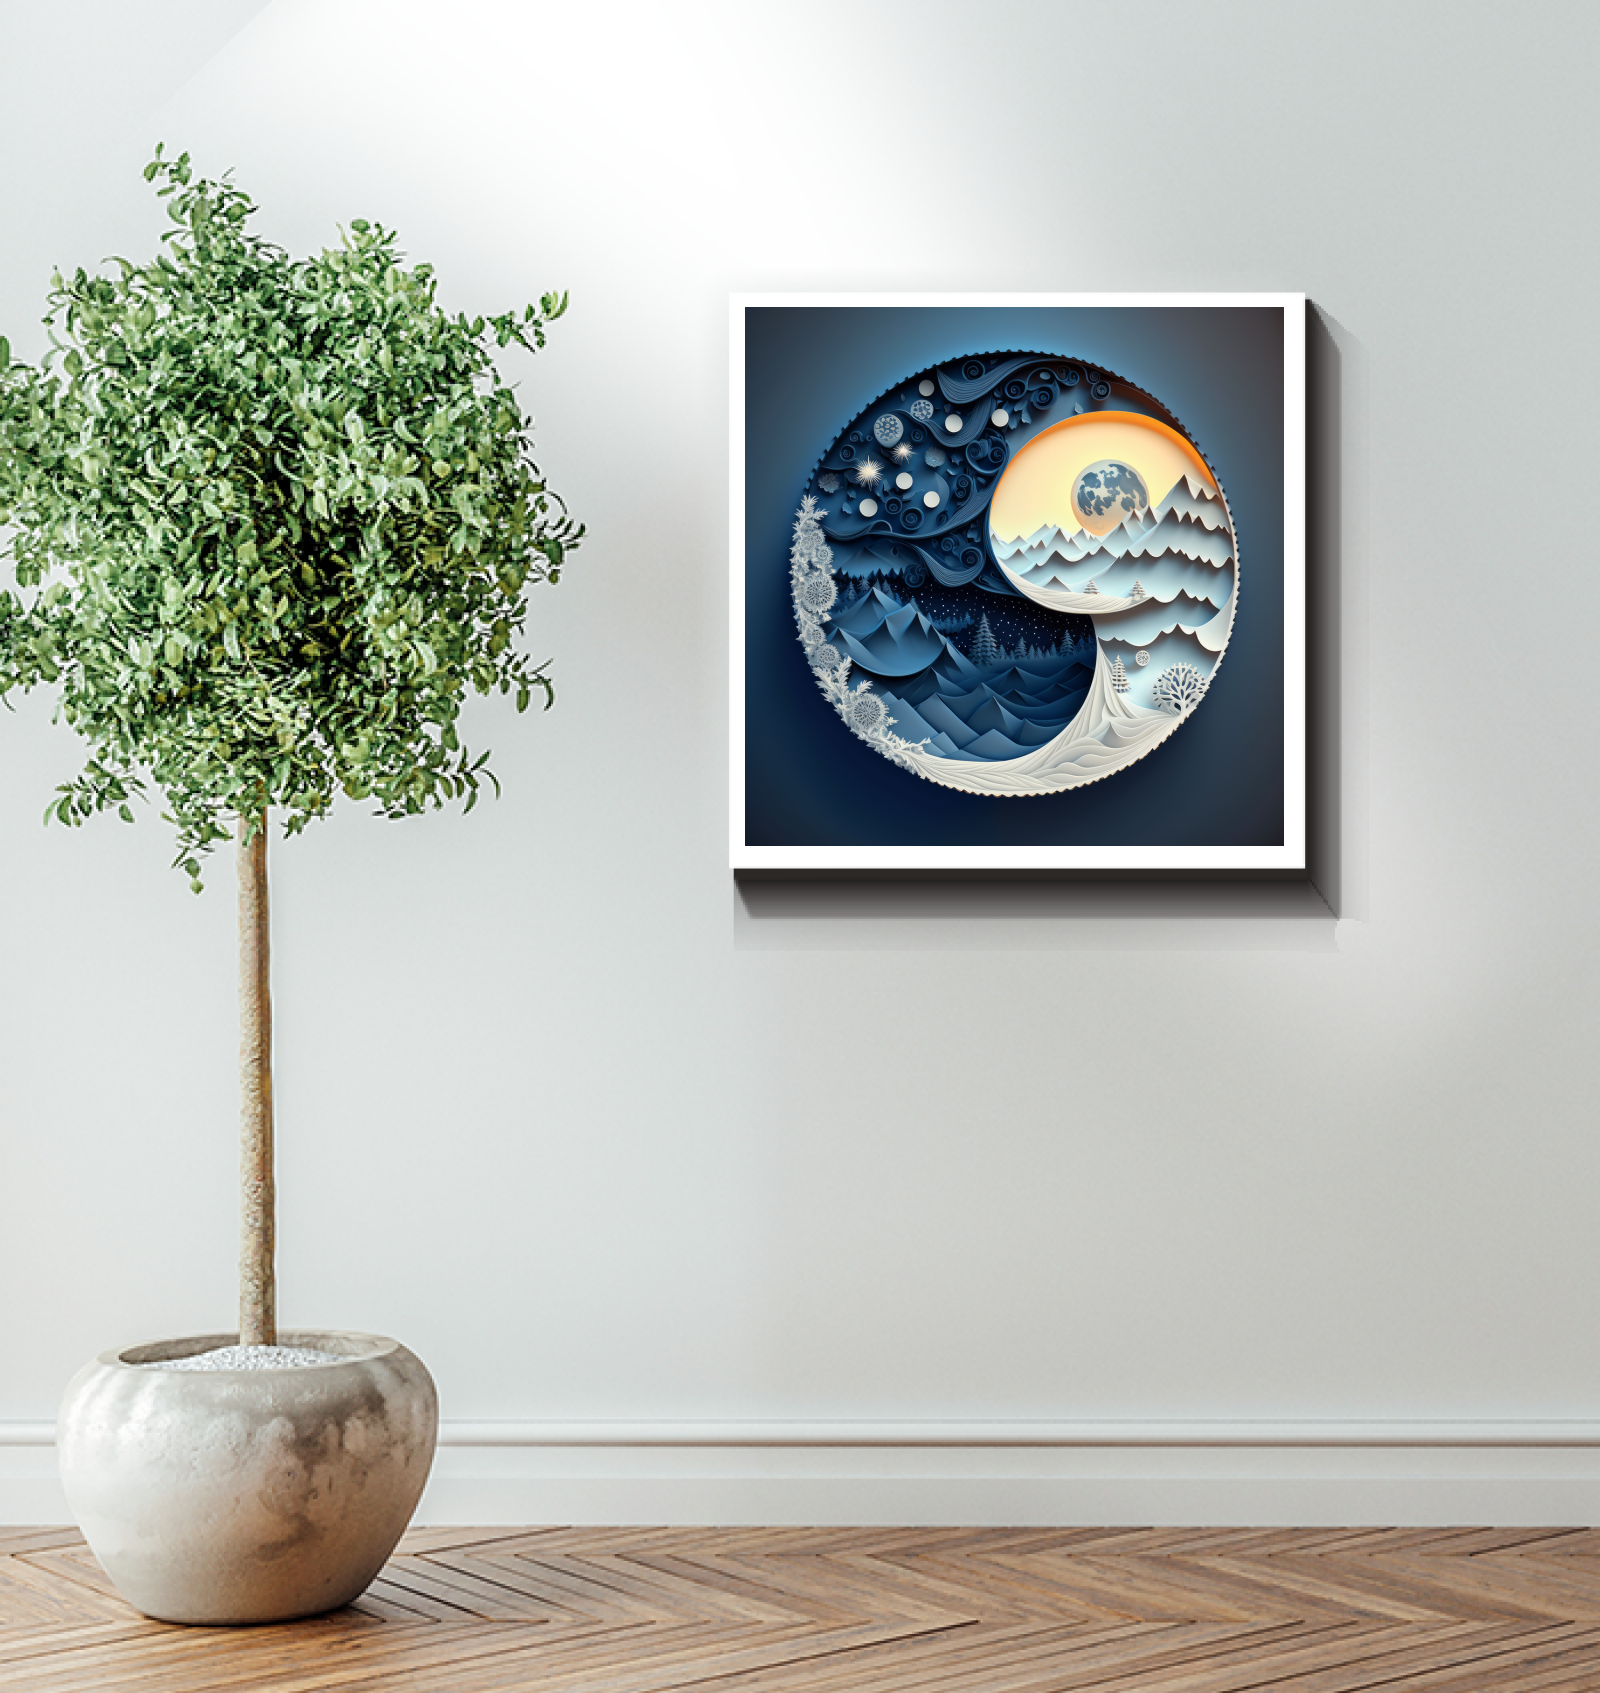 Celestial bodies wrapped canvas for serene ambiance.